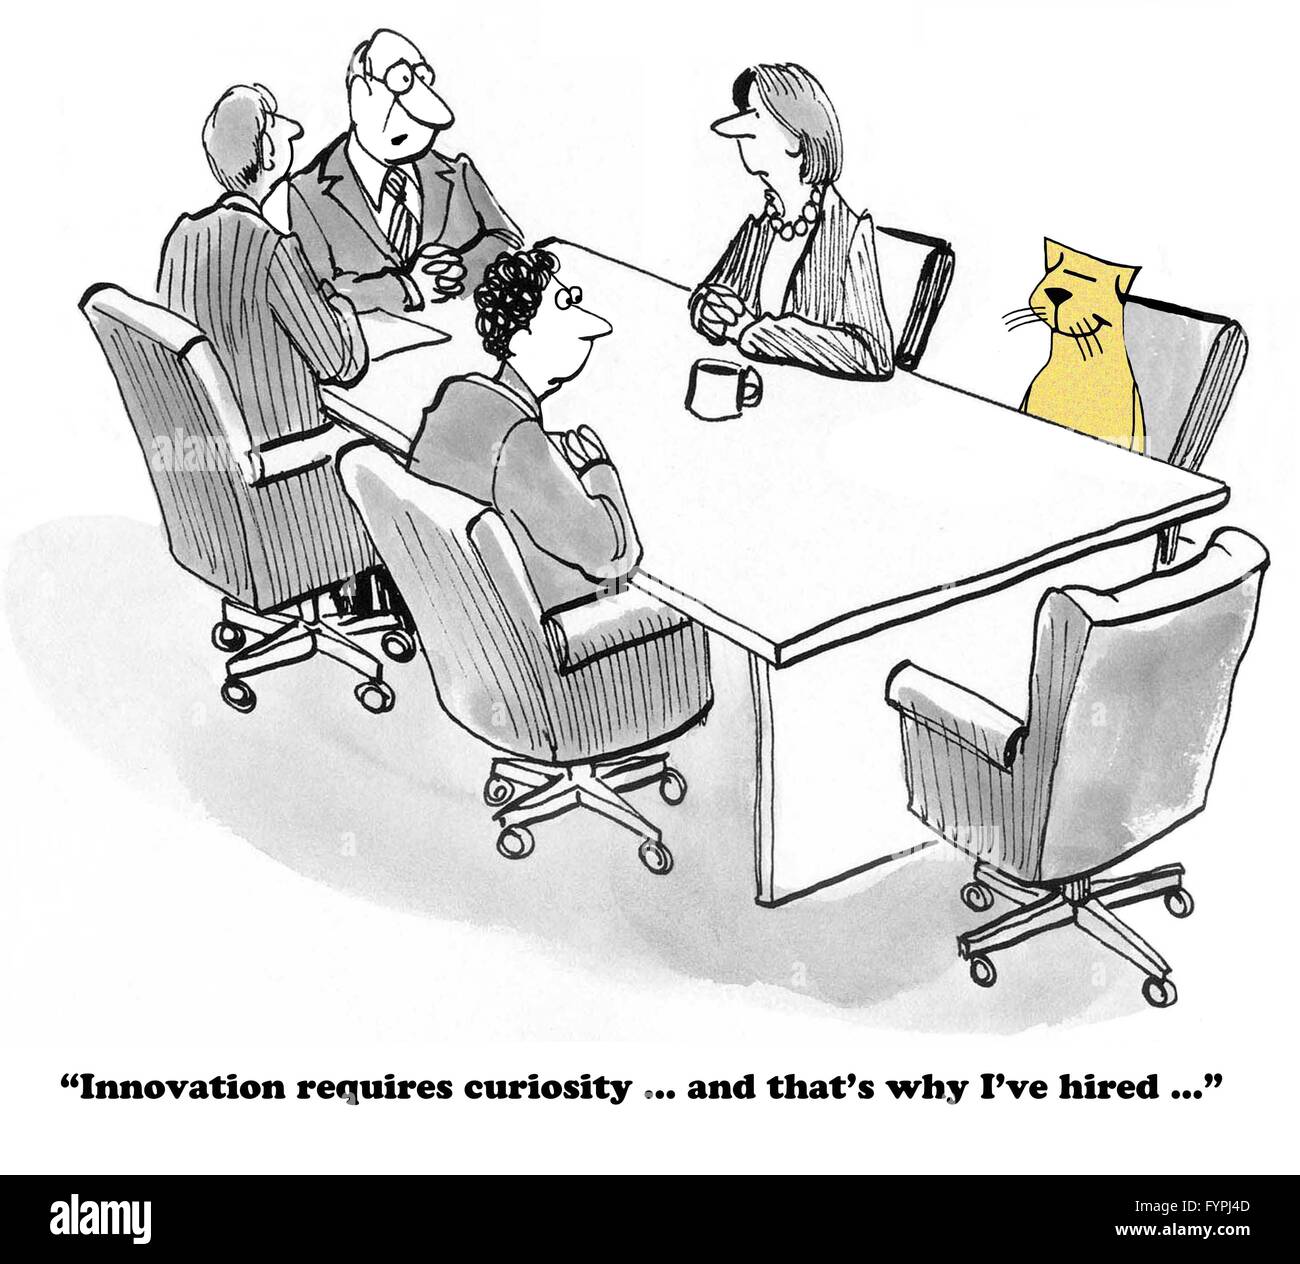 Business cartoon about curiosity and innovation. Stock Photo